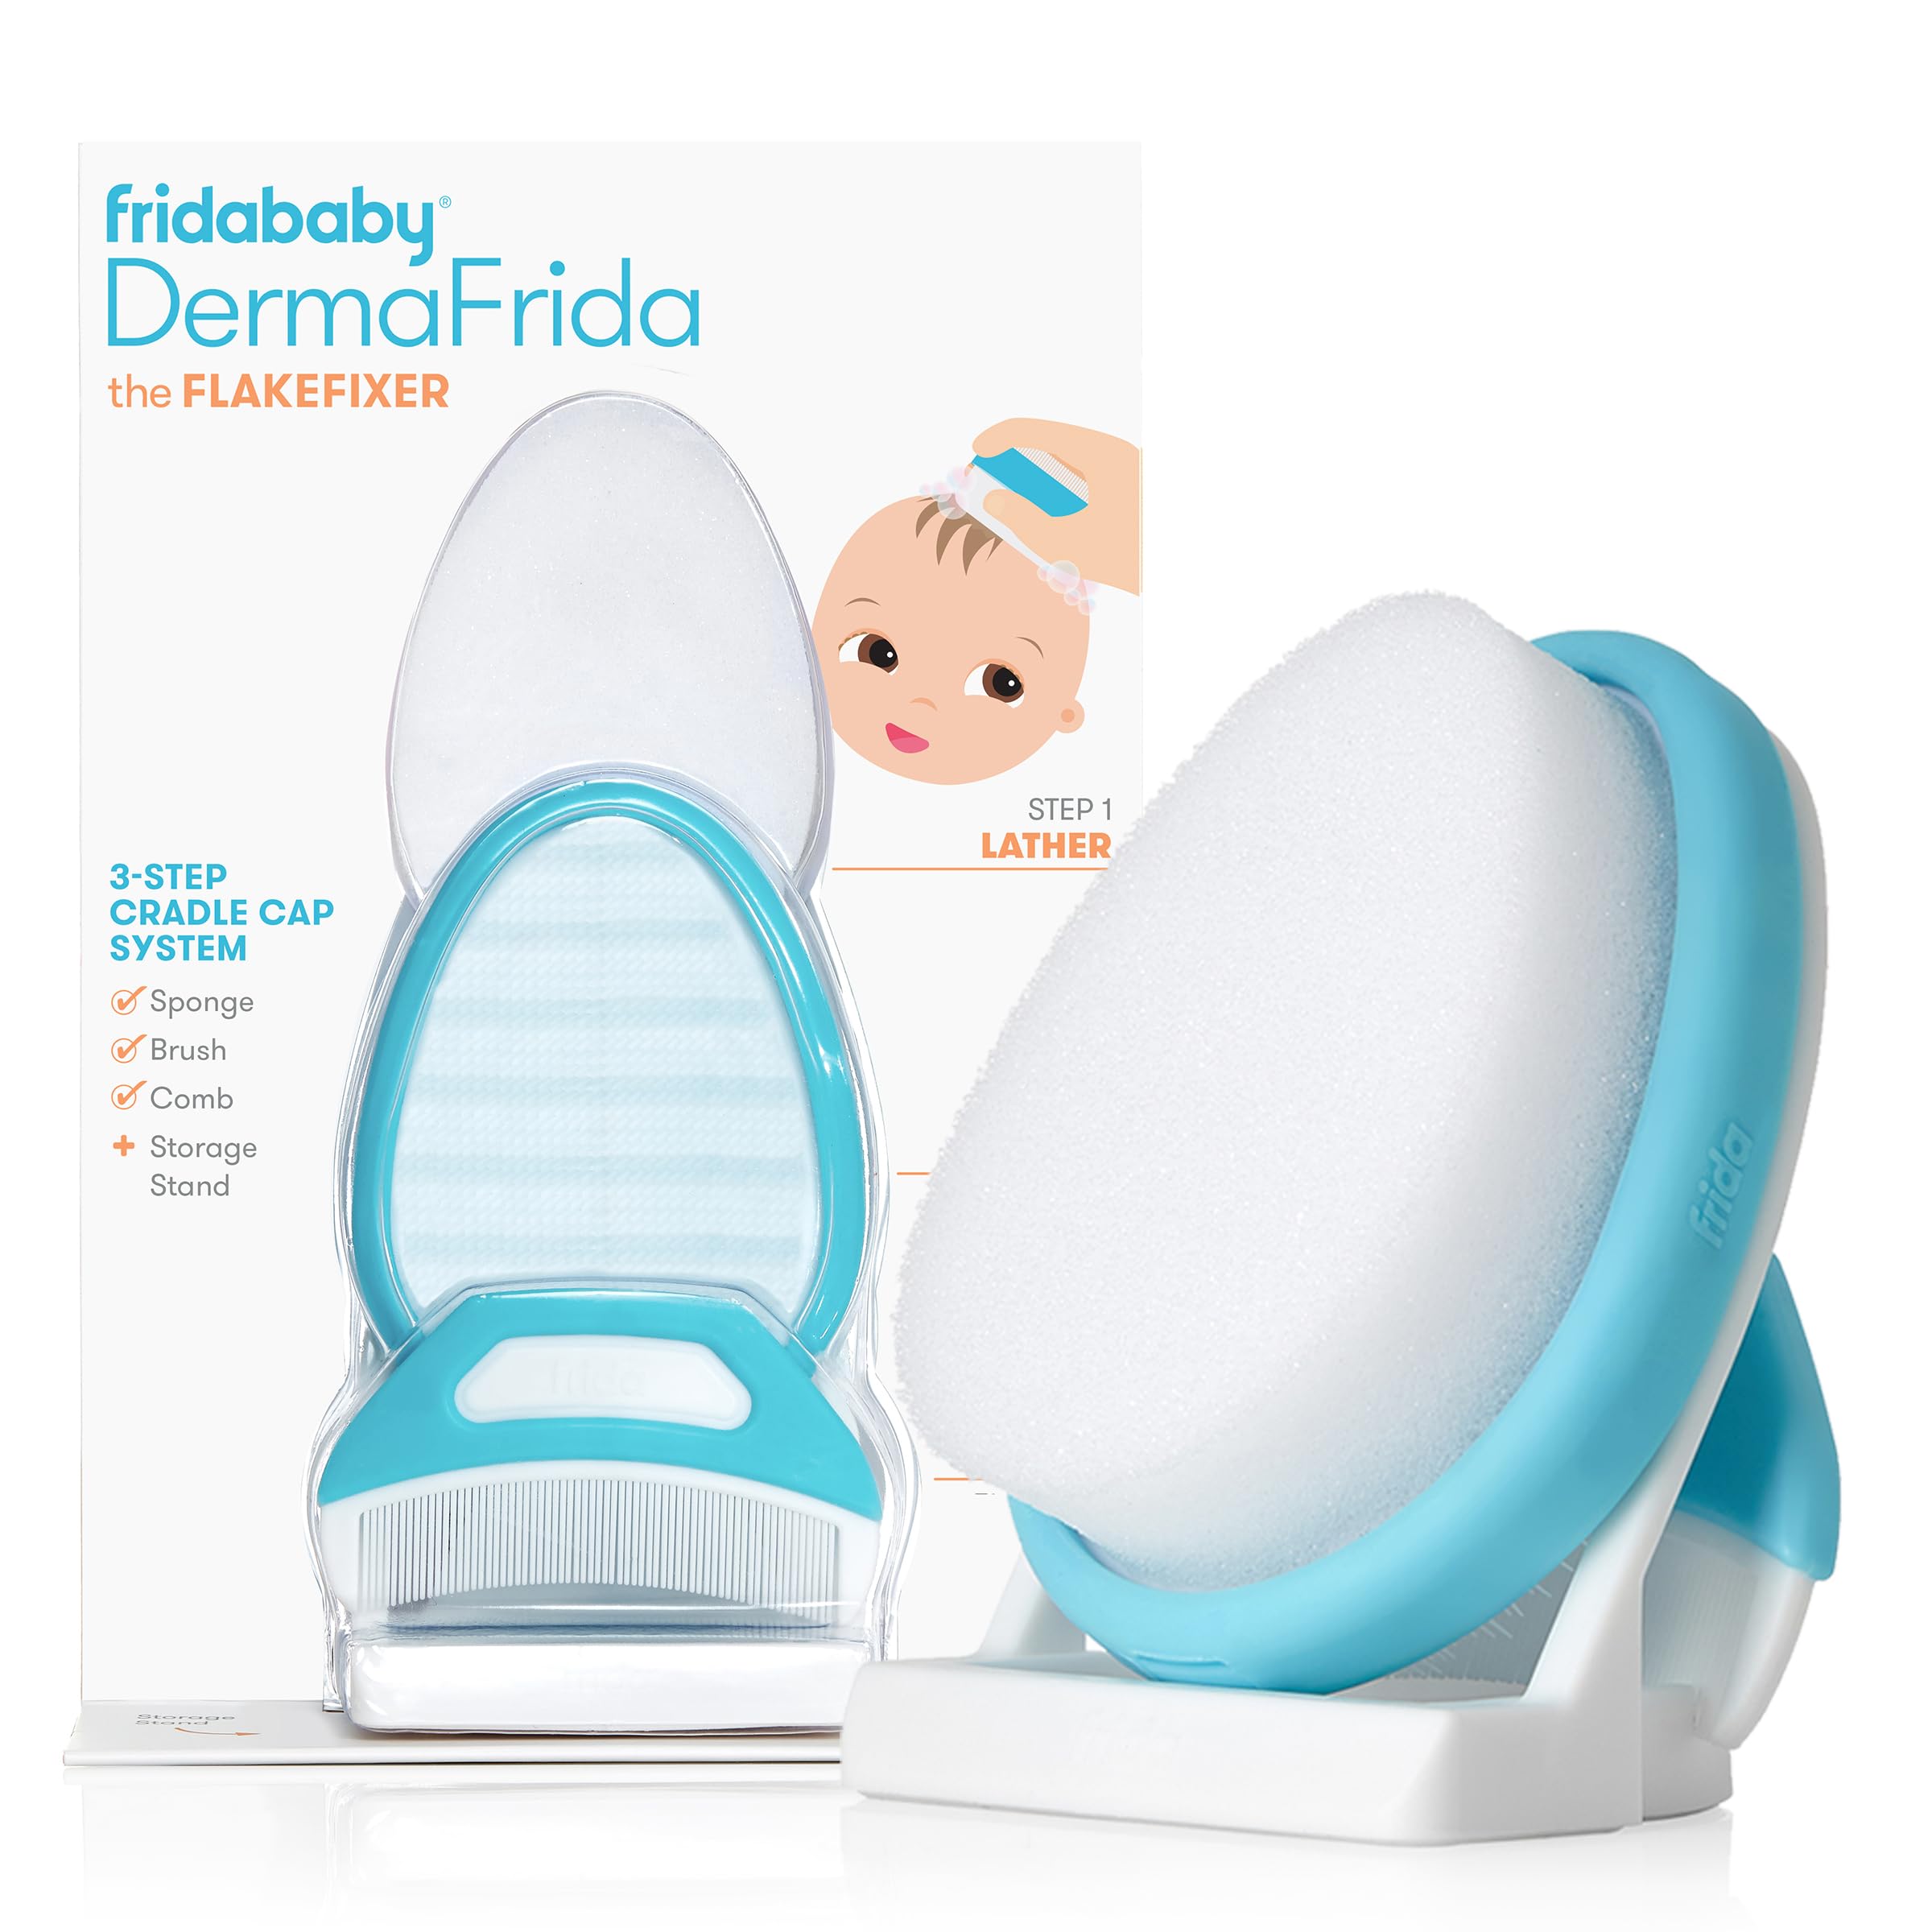 Frida Baby The 3-Step Cradle Cap System | DermaFrida The FlakeFixer | Sponge, Brush, Comb and Storage Stand for Babies with Cradle Cap